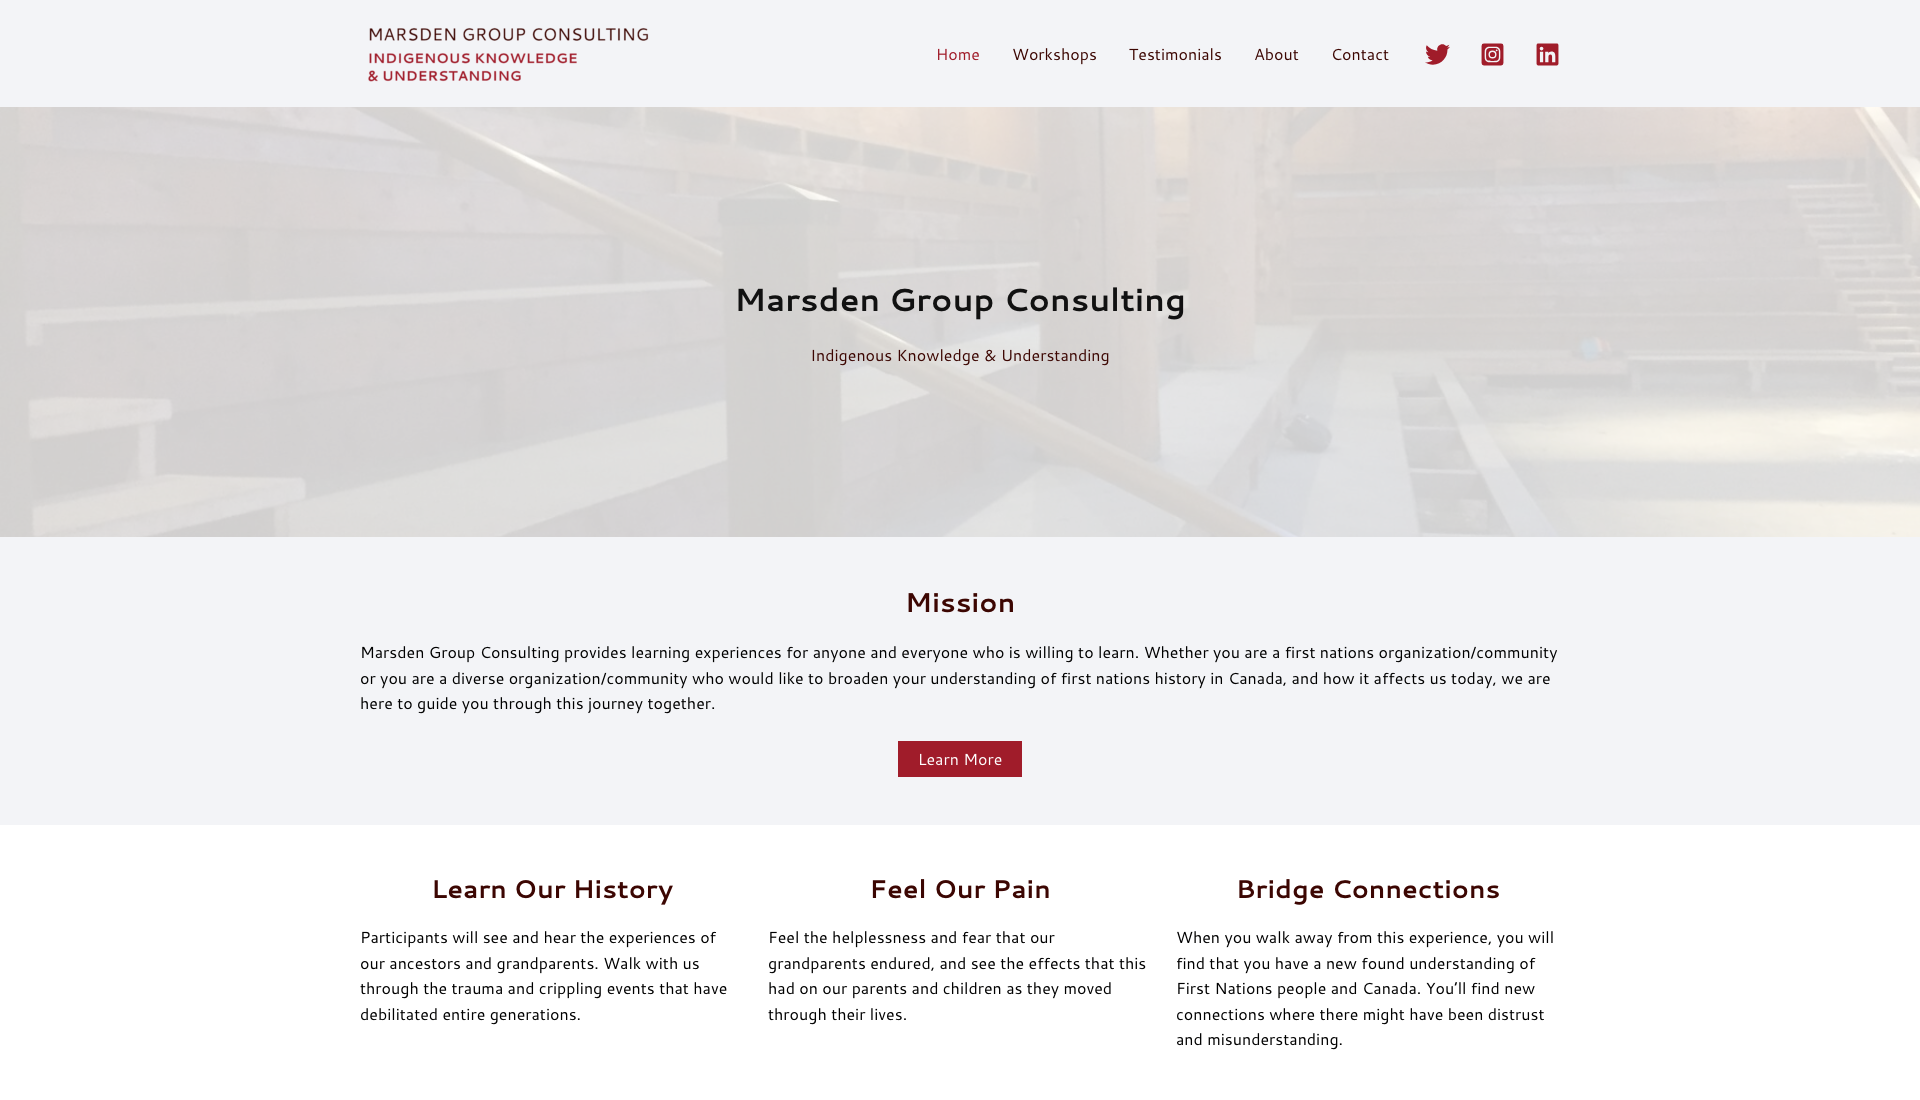 Marsden Group Consulting